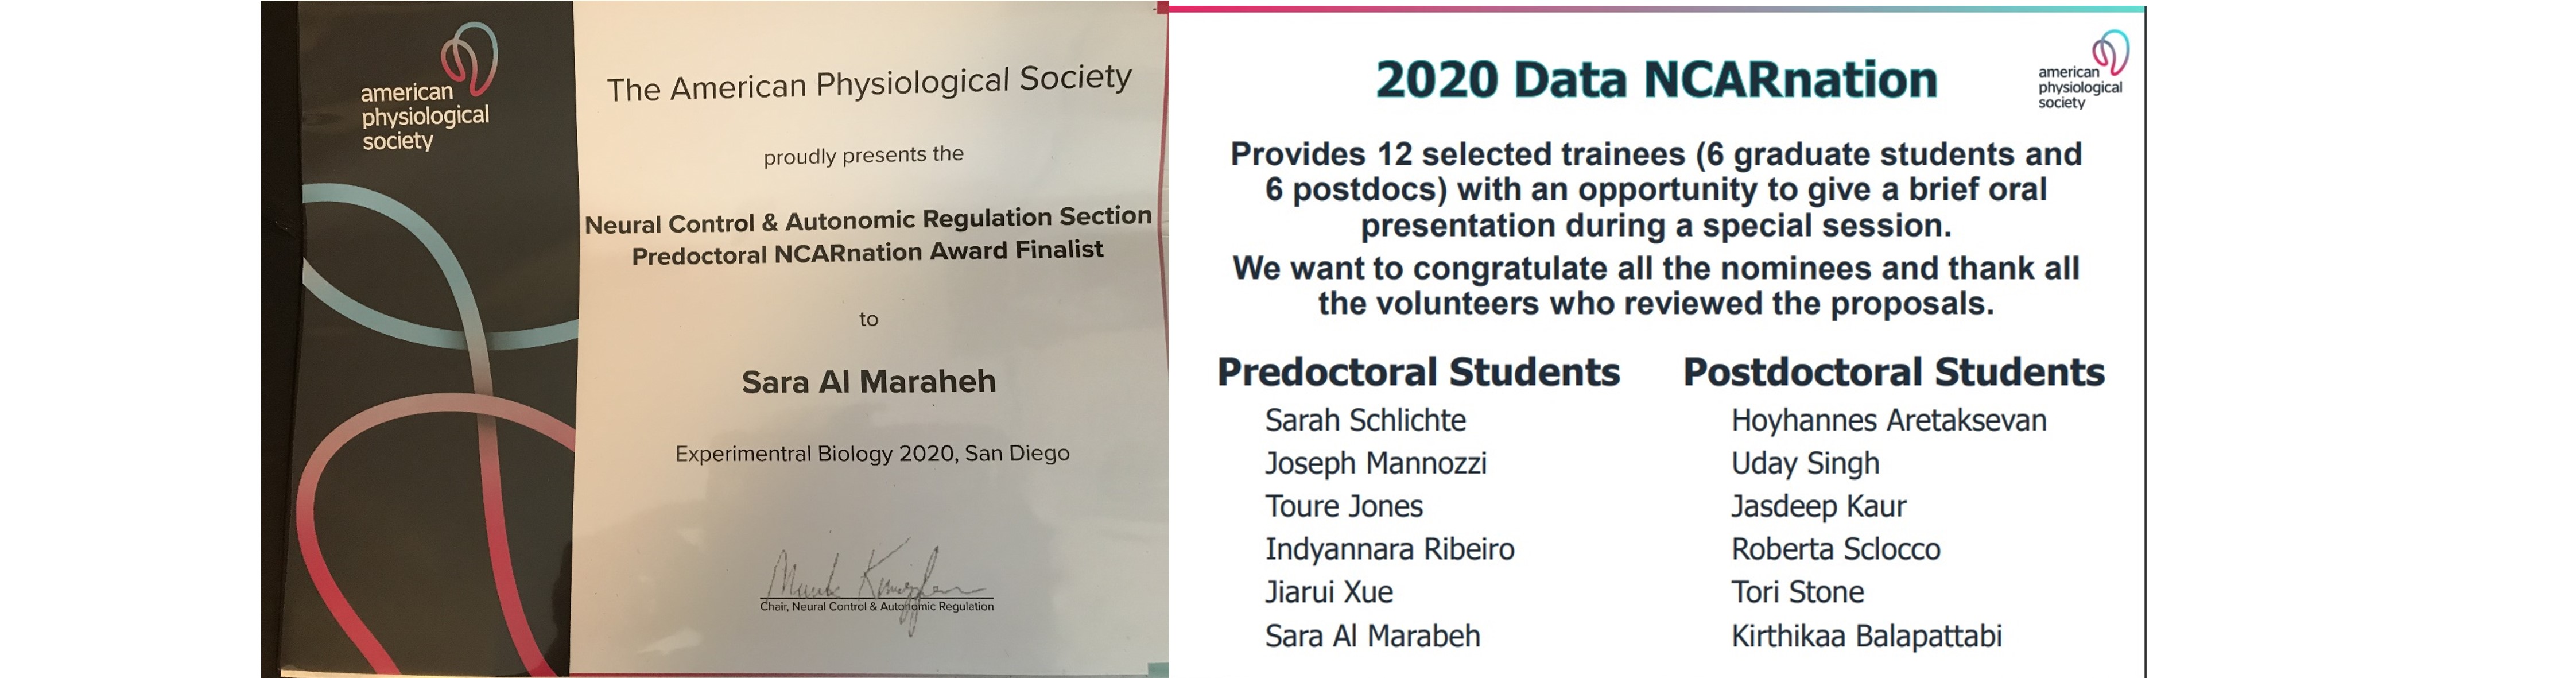 Congratulations to Sara AlMarabeh who was shortlisted for the American Physiological Society's Predoctoral NCARnation Award.
